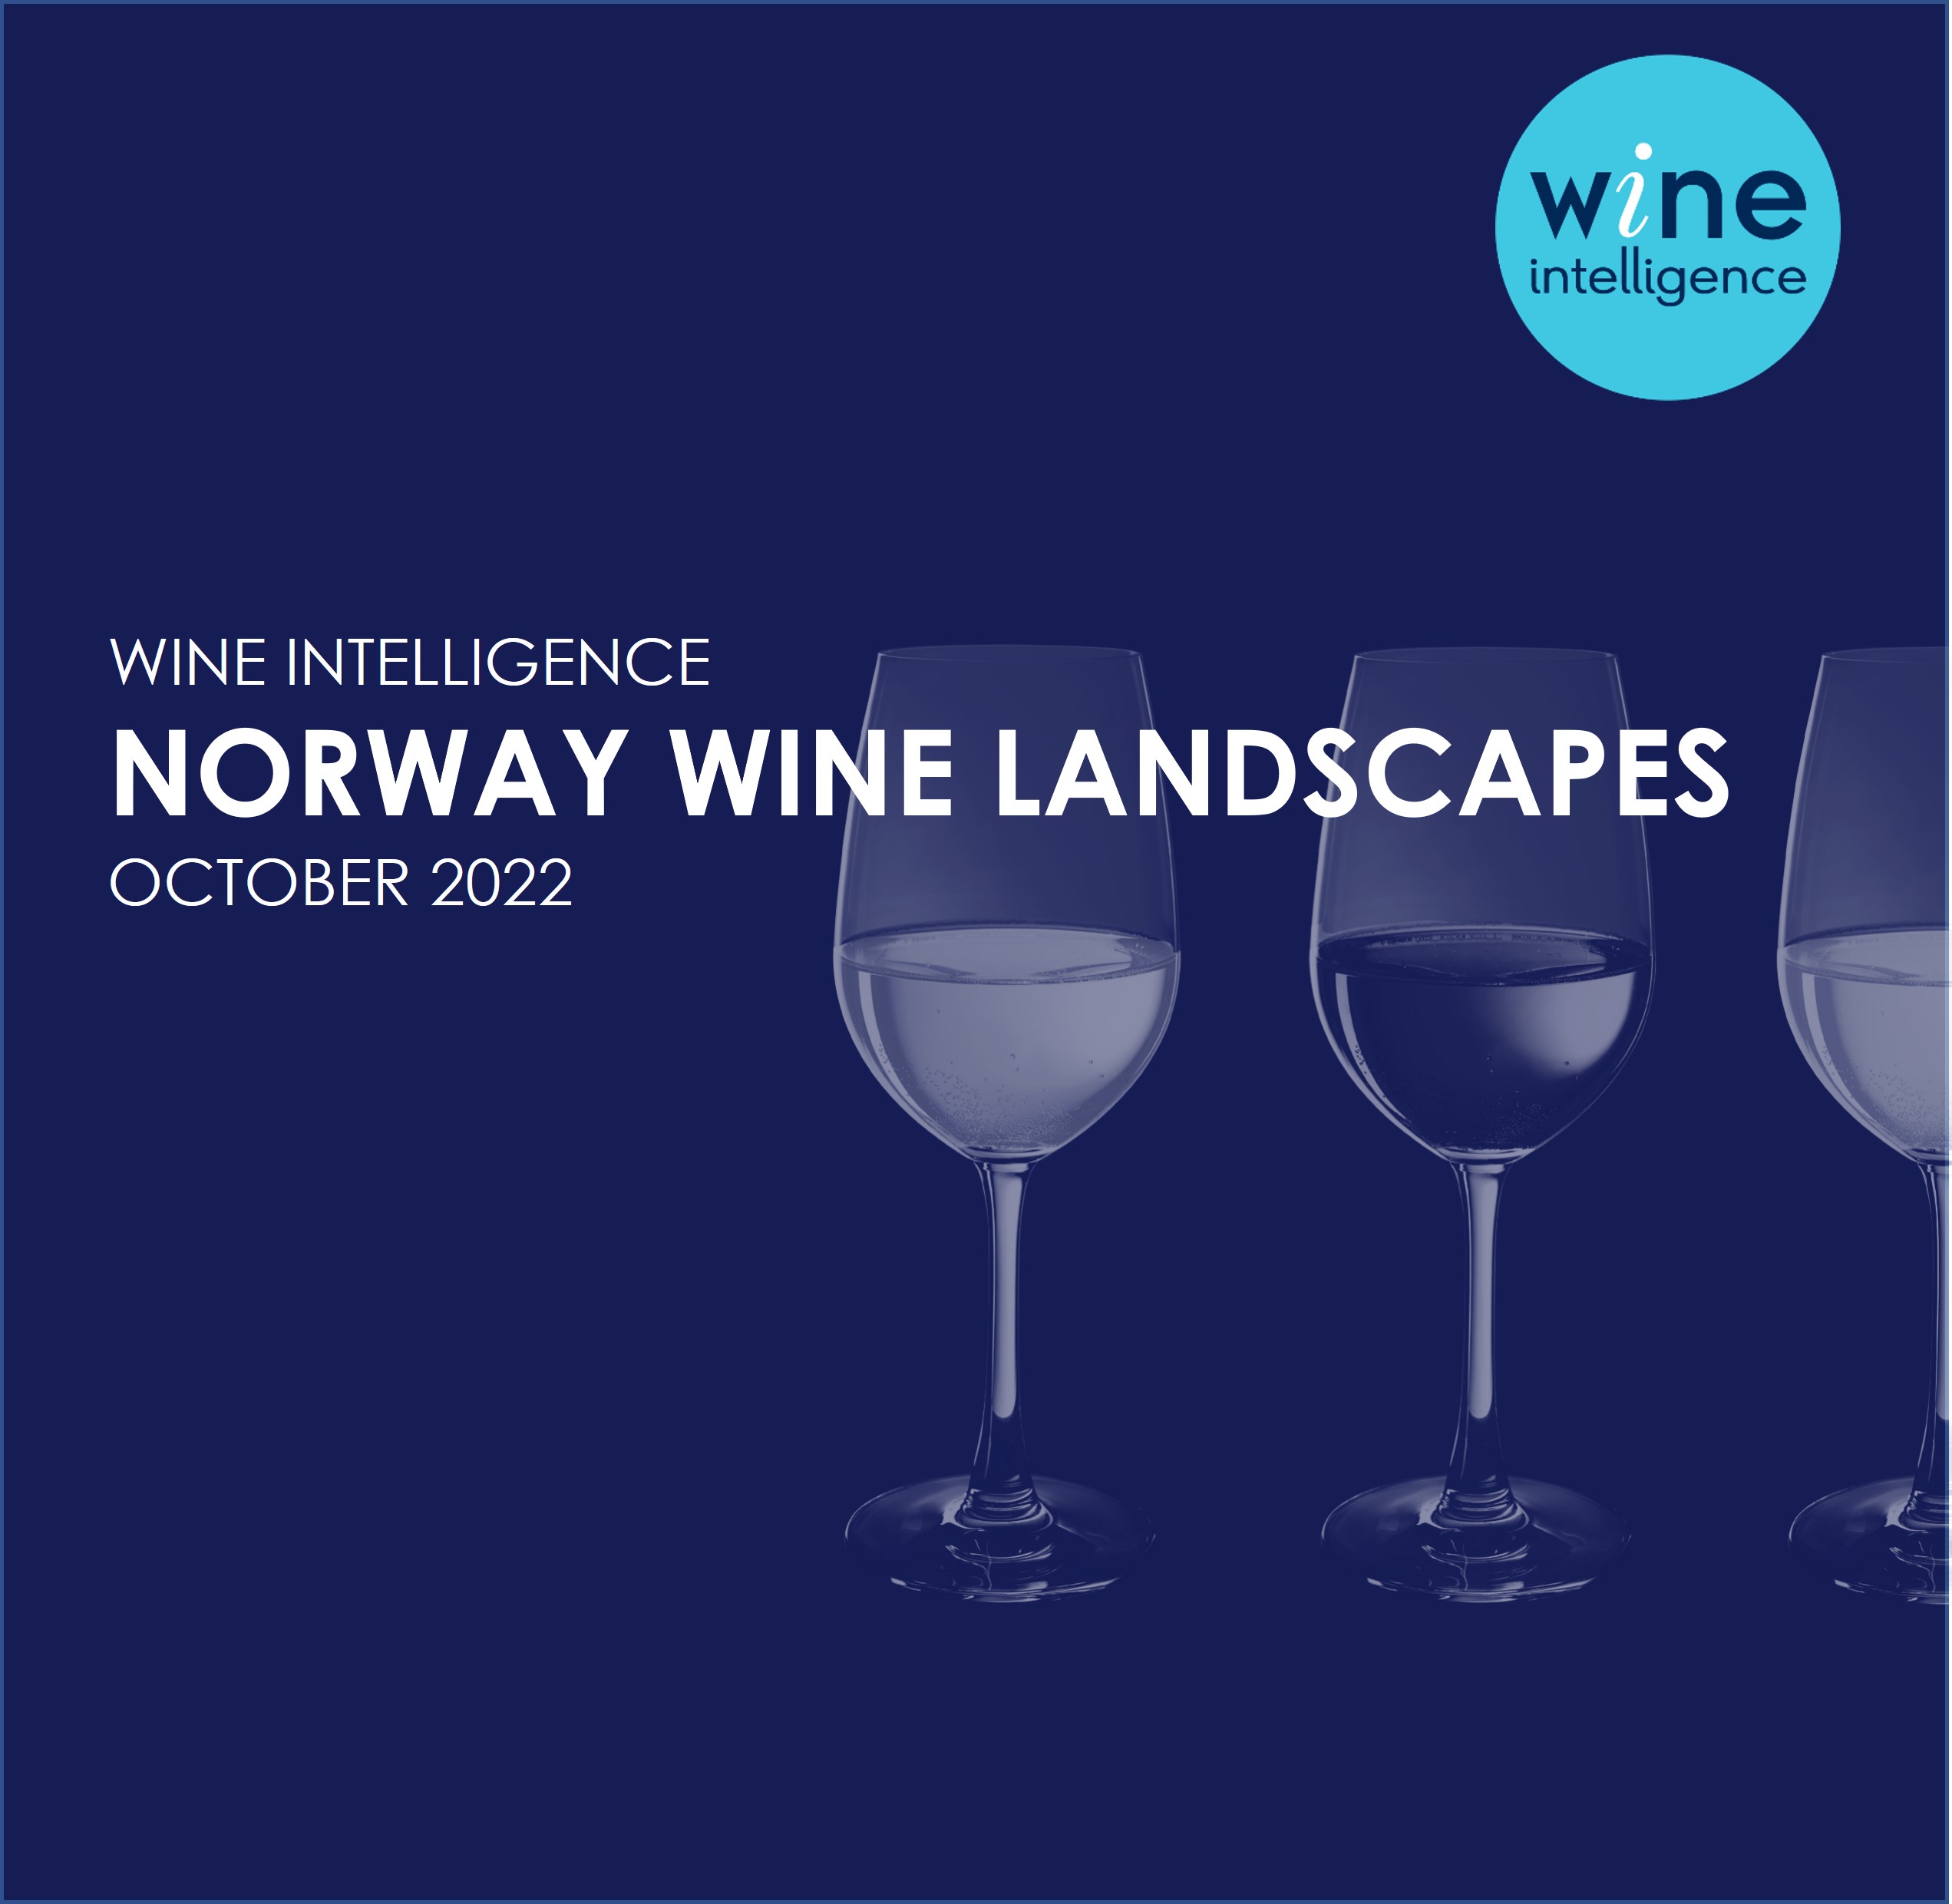 Norway wine landscapes report 2022 - View Reports